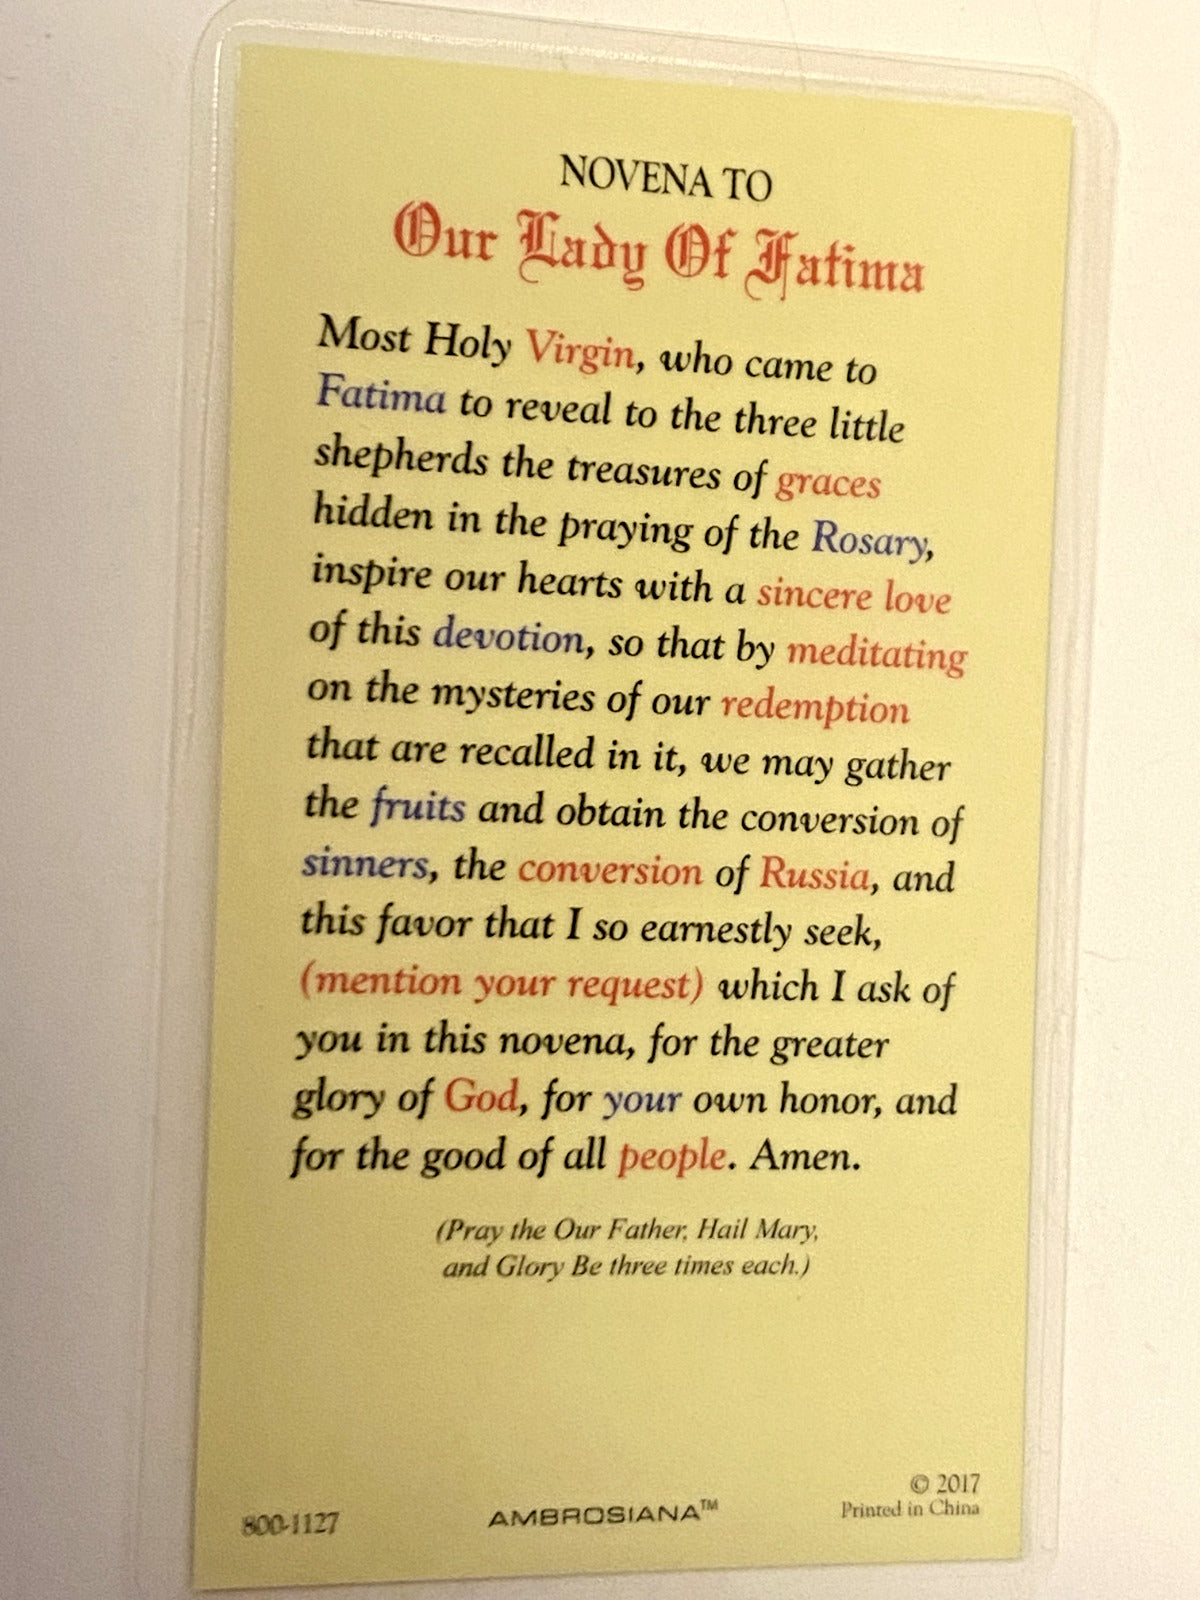 Our Lady of Fatima Laminated Novena Prayer Card, New - Bob and Penny Lord